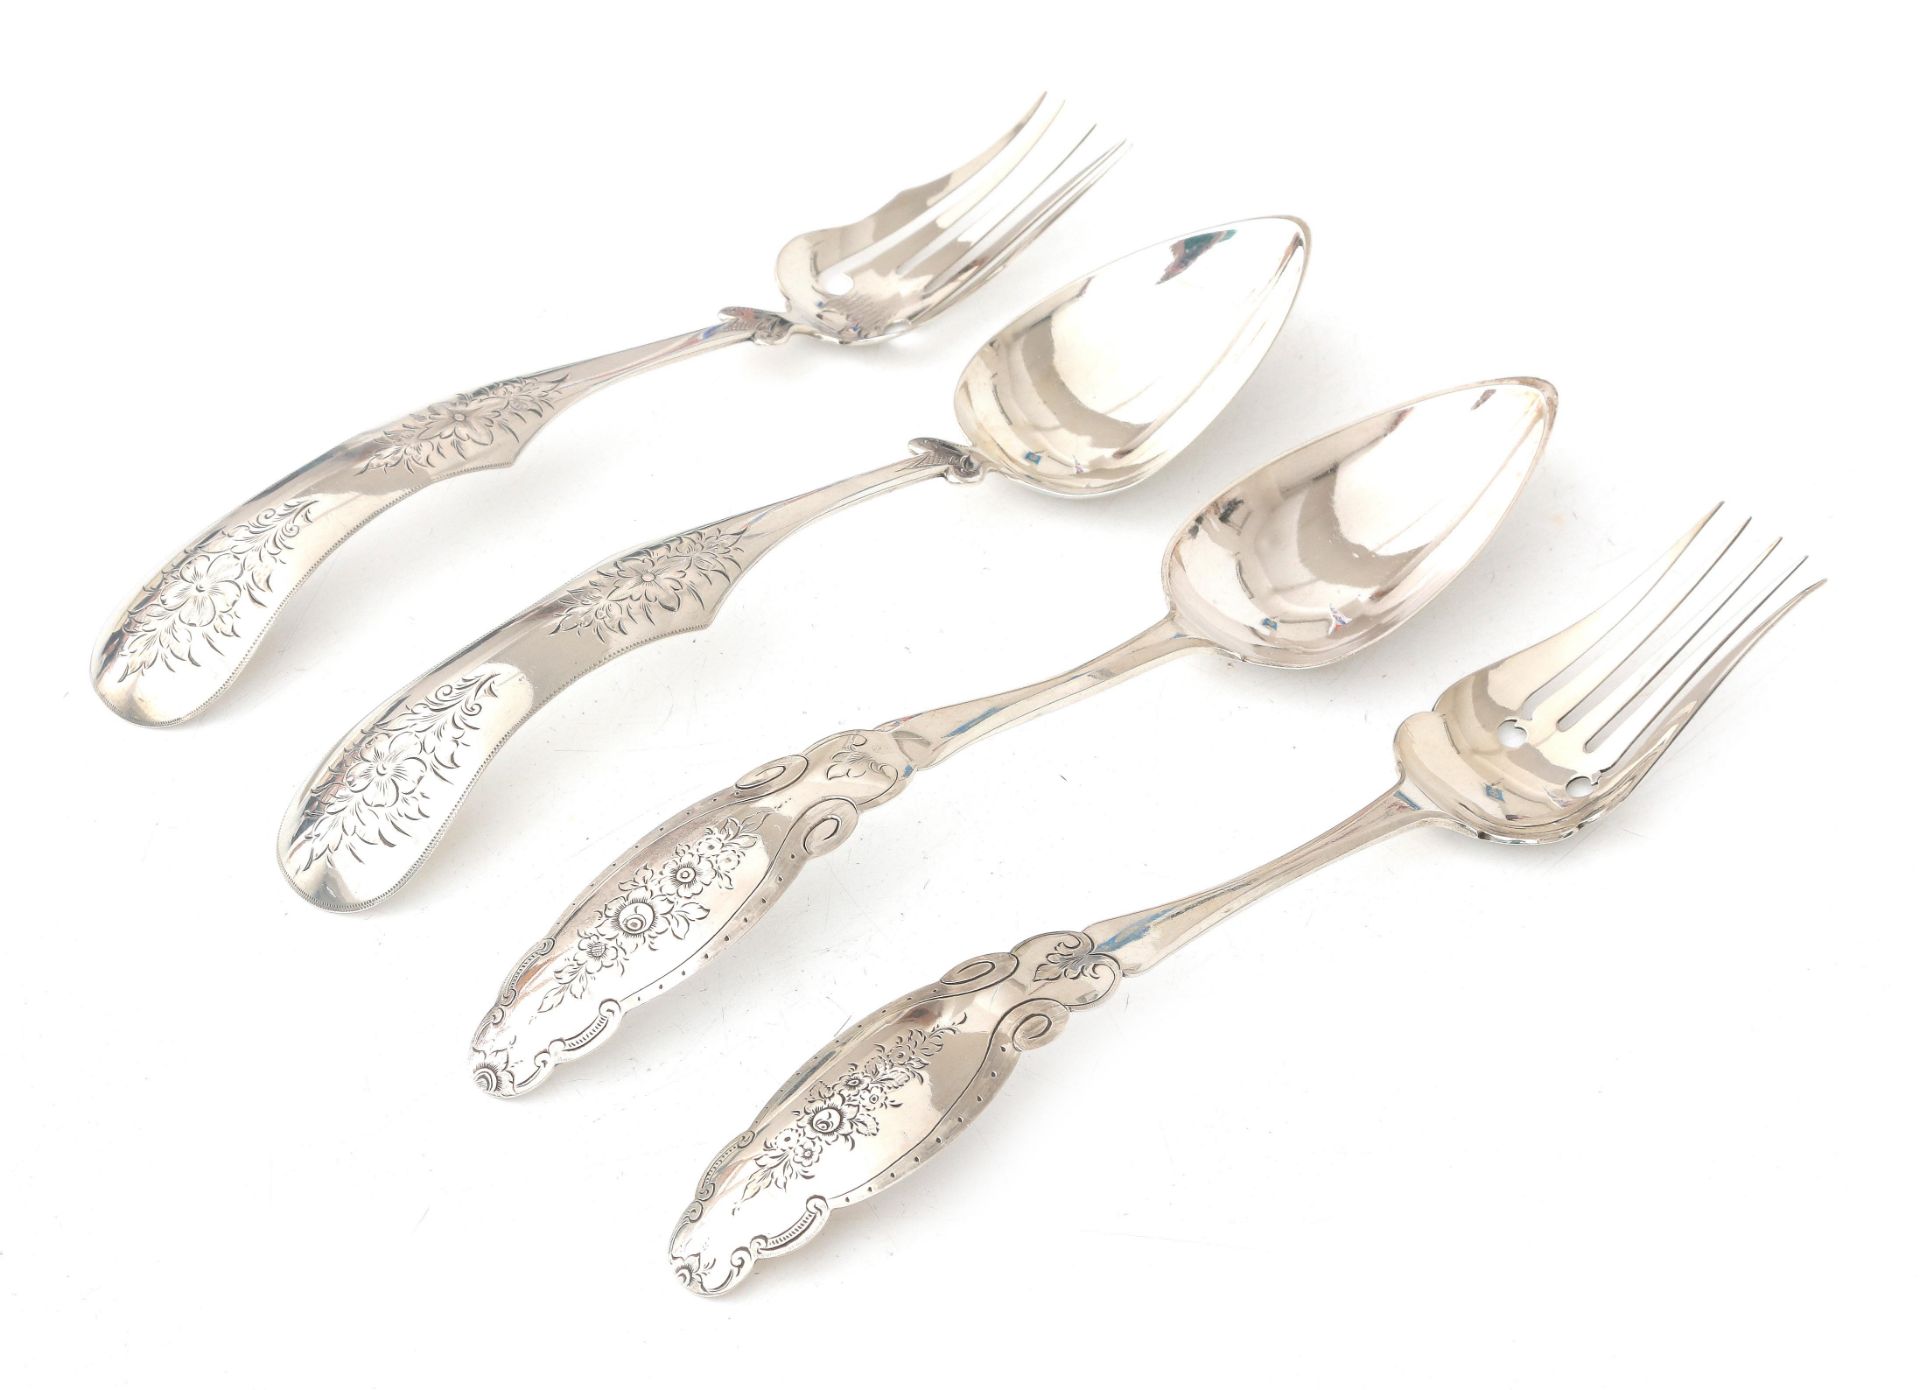 Two 835 silver server cutlery sets with floral engraved decoration, Holland, 1866. - Image 2 of 3